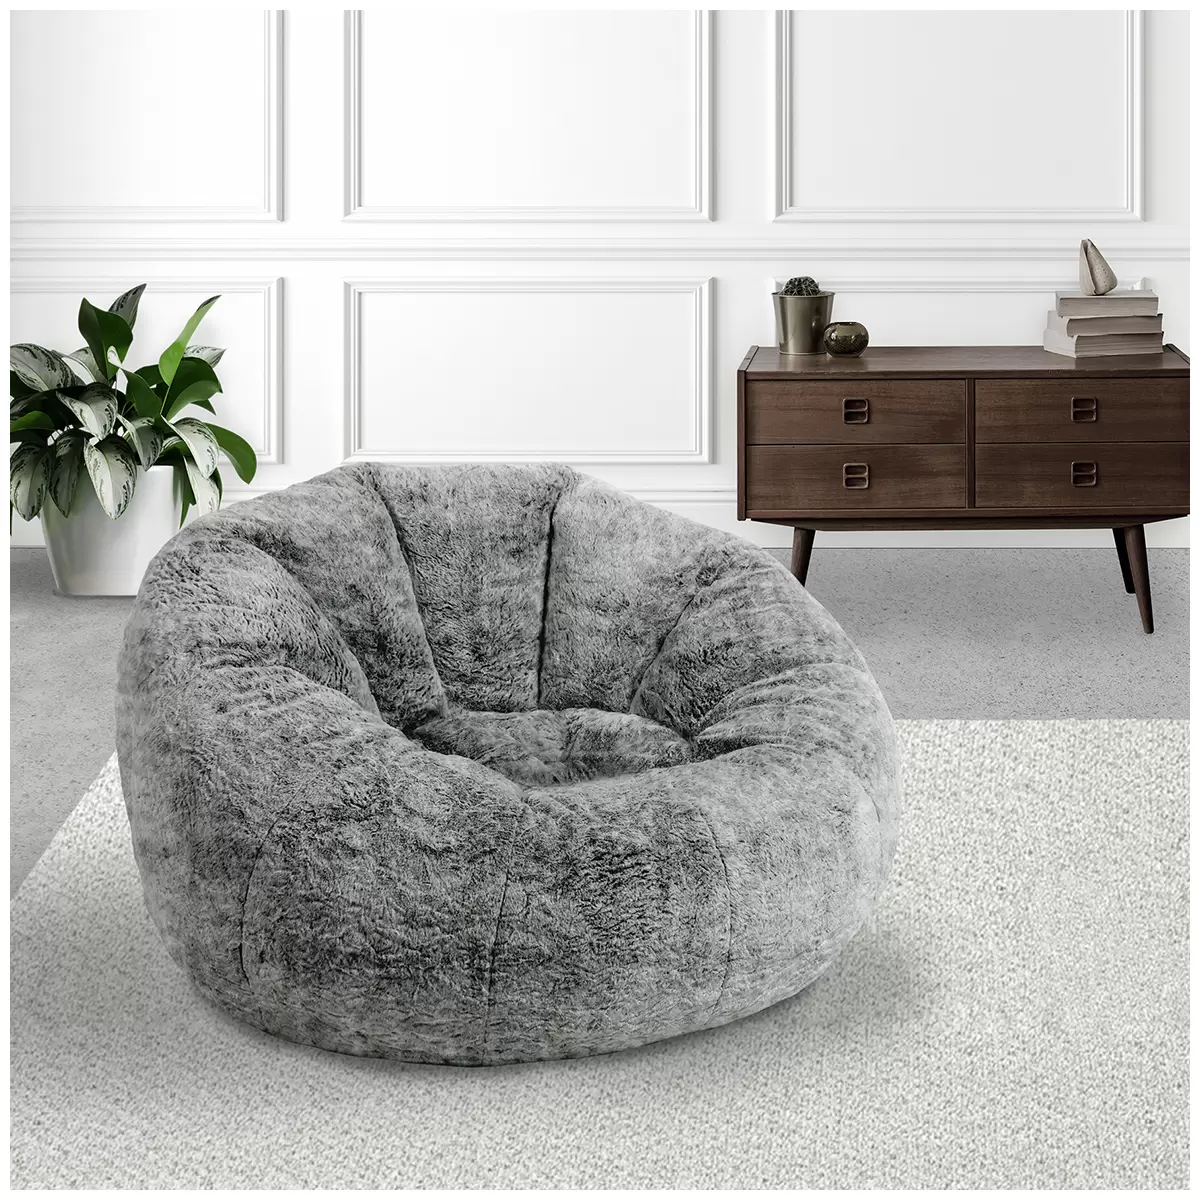 Lounge & Co Donut Chair